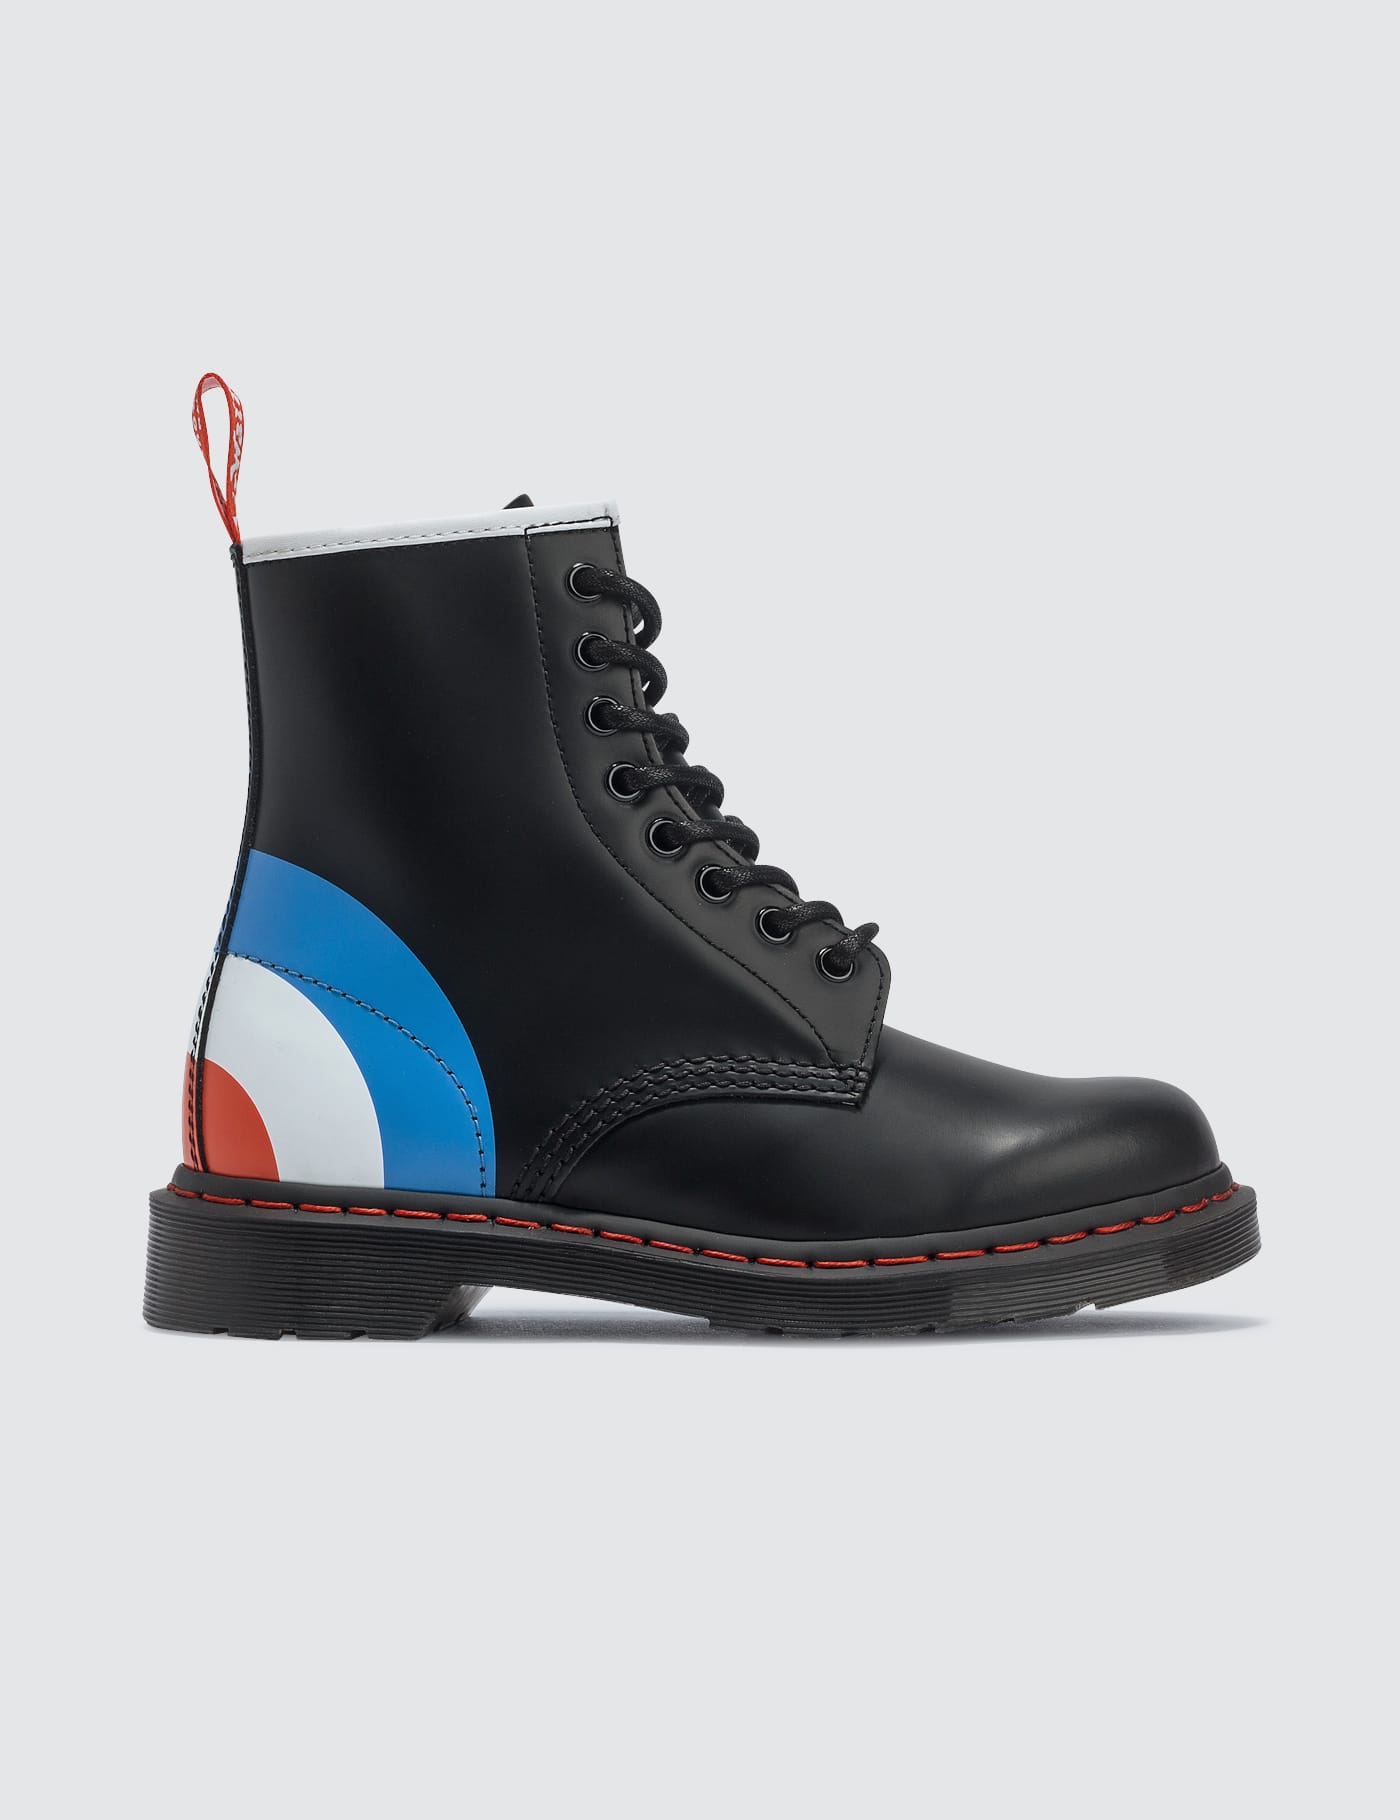 who sells dr martens